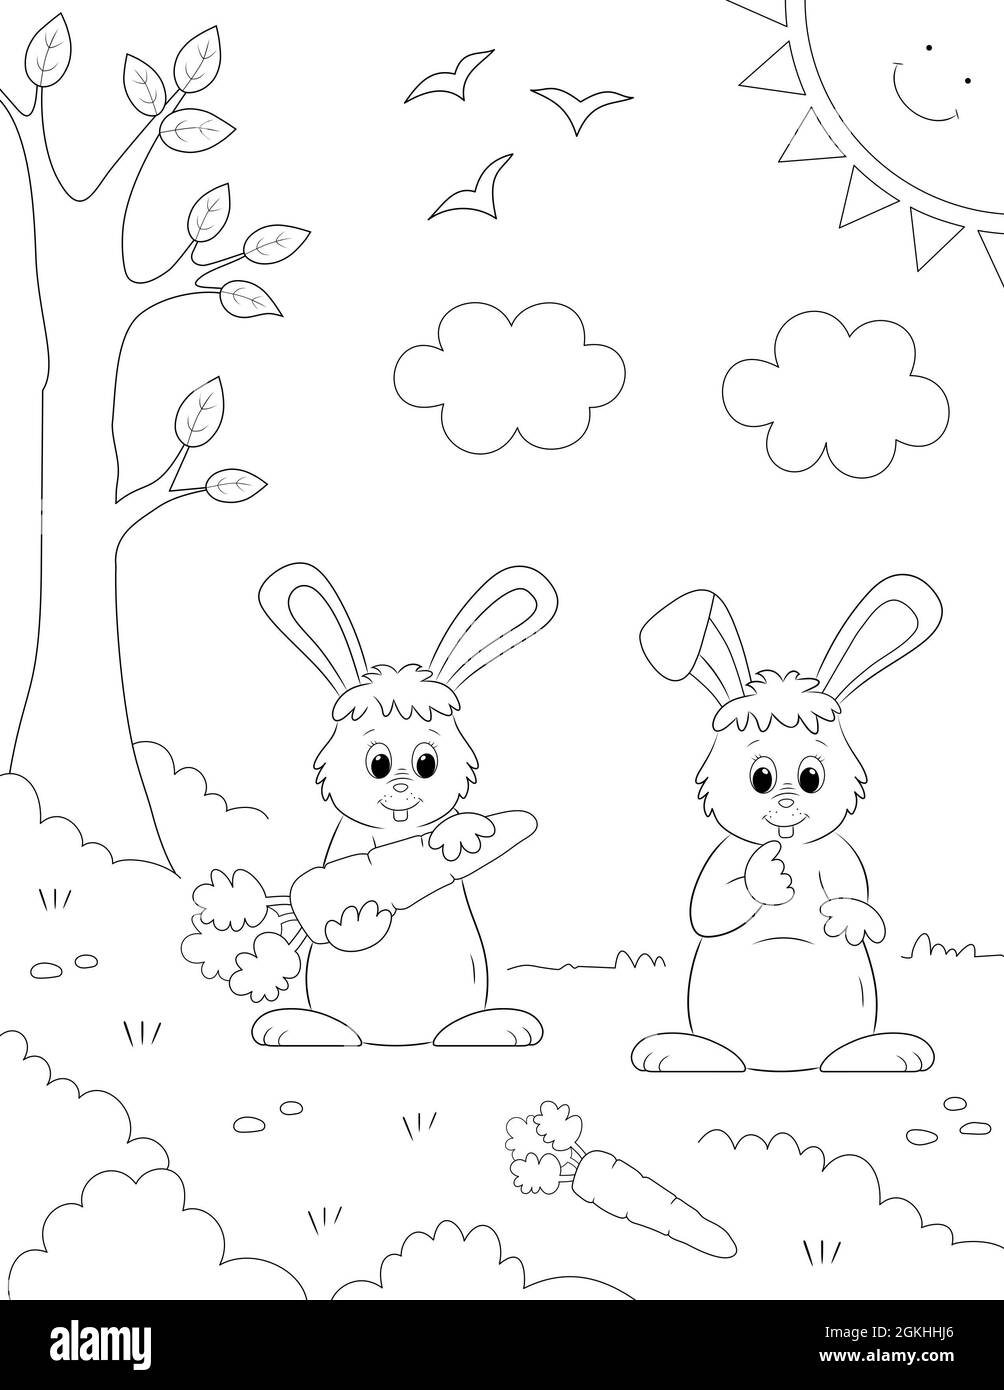 two cute rabbits one of them holding a carrot and a scene in a garden with birds, clouds, a cartoon sun and a tree, coloring page for kids Stock Photo